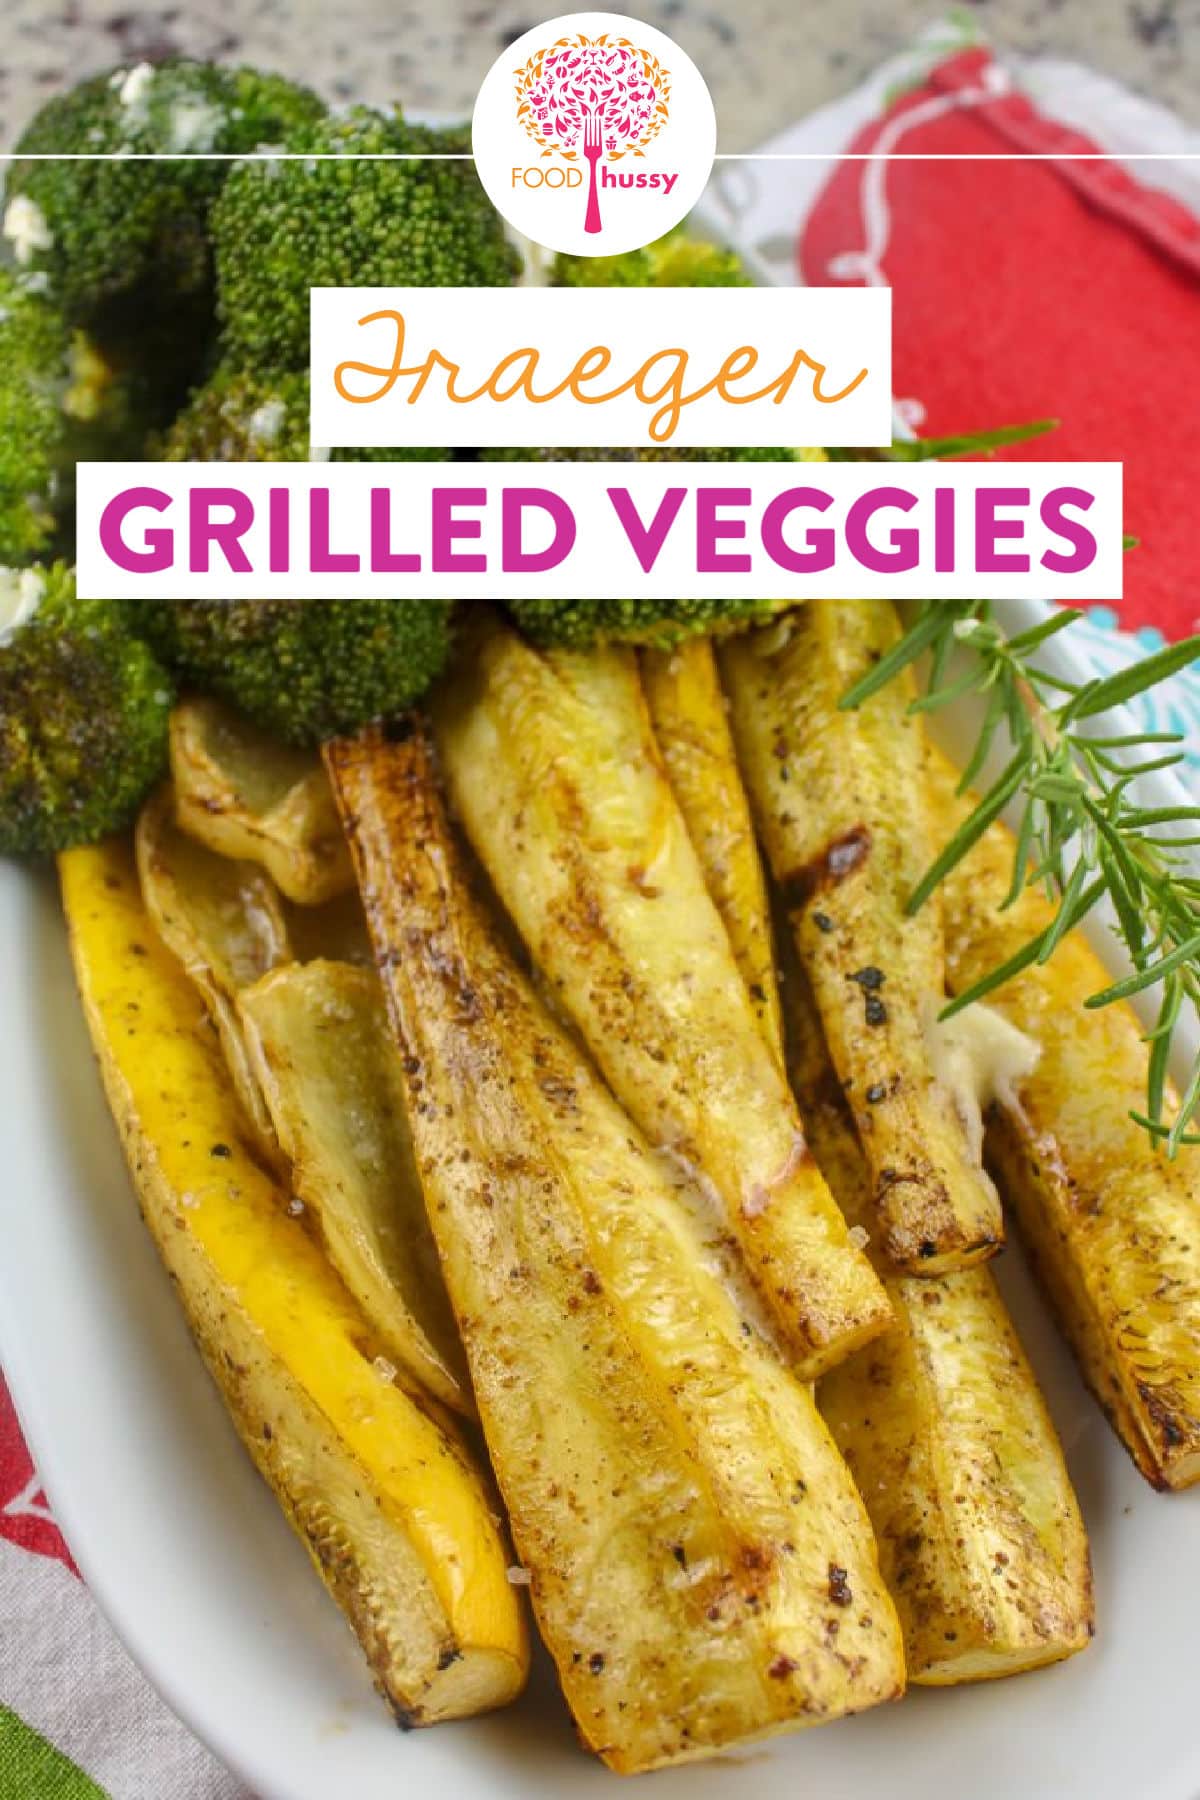 Traeger Vegetables are the easiest summertime side dish you'll find! Set the Traeger to the temp and you're done - plus the smoky flavor from the Traeger pellets is delicious! This week I made grilled zucchini, peppers and broccoli but there are so many options.  via @foodhussy